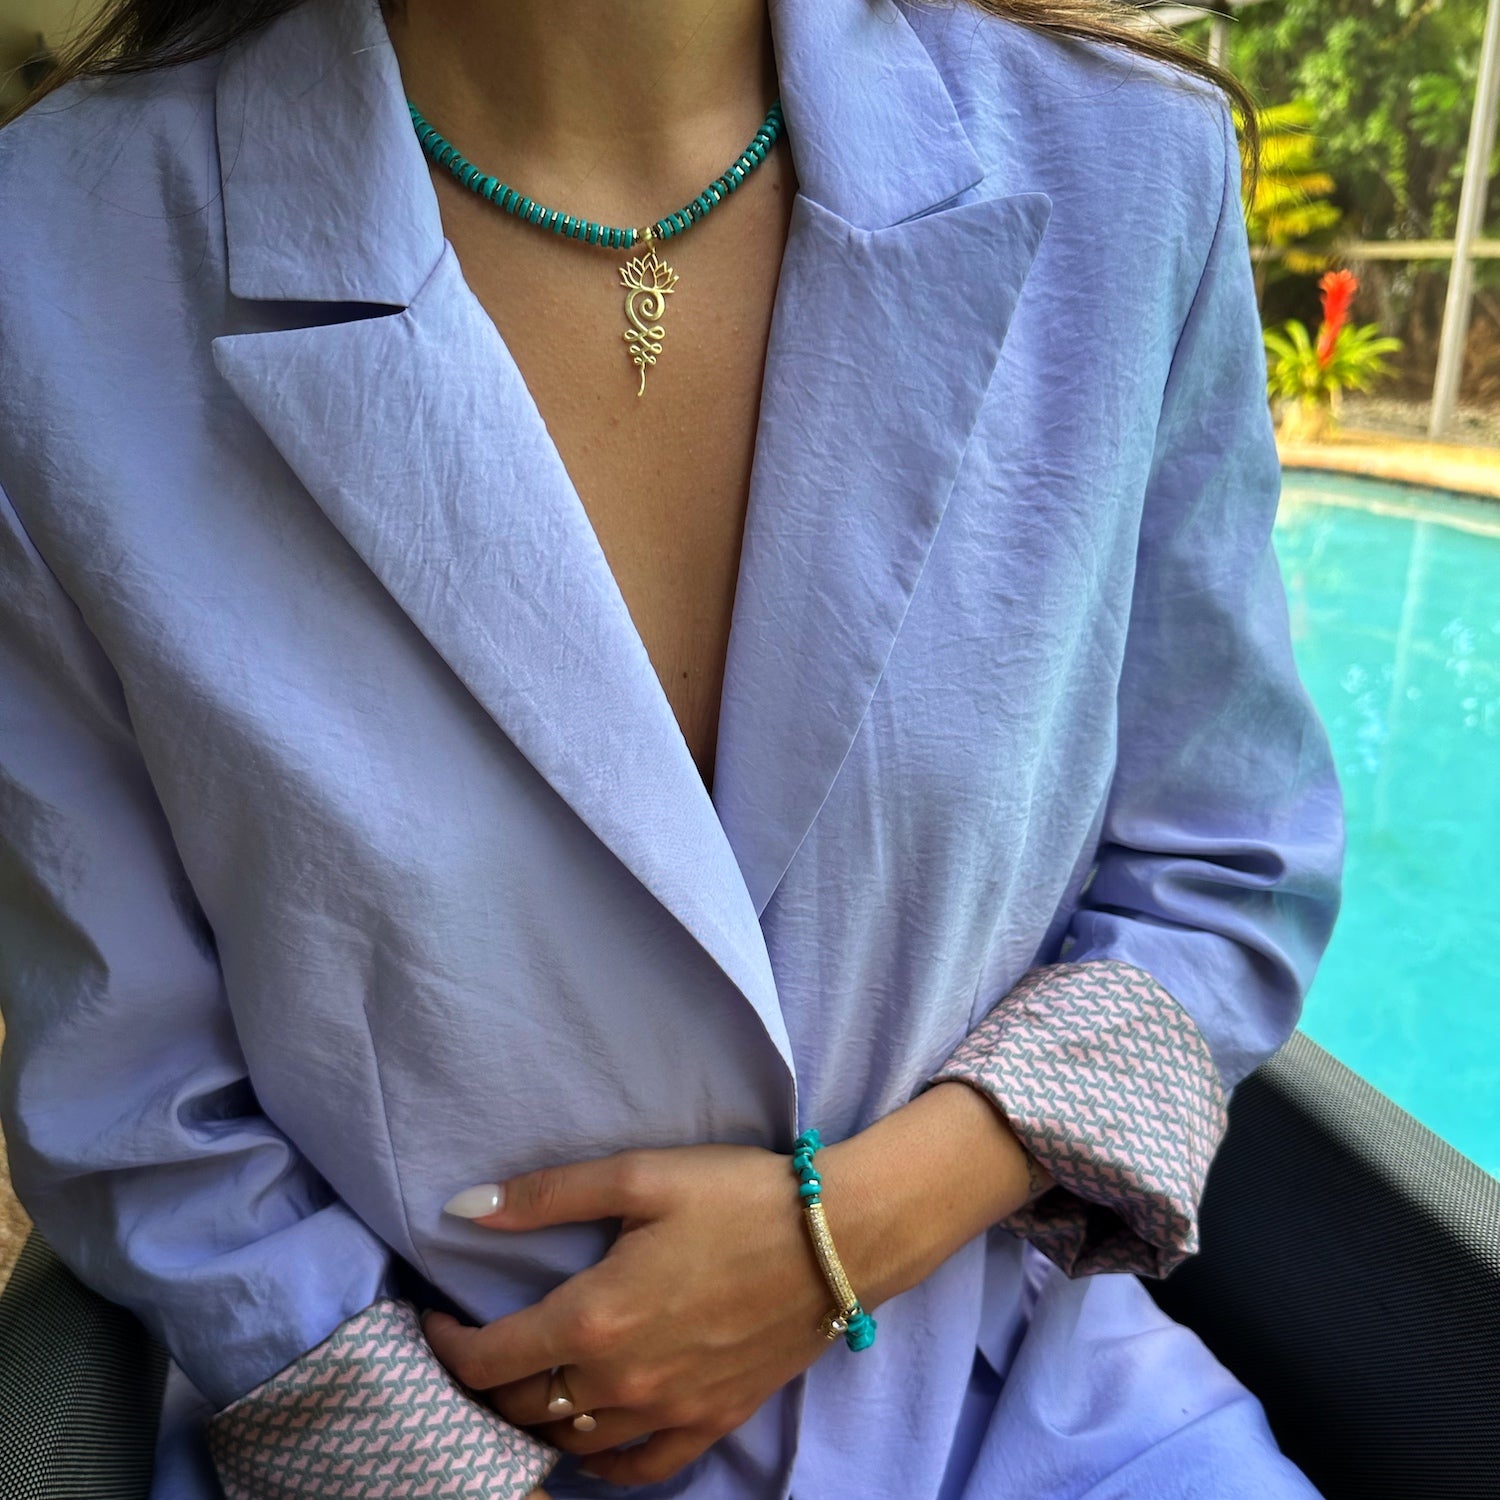 A model gracefully wearing the Turquoise Unalome Serenity Necklace, embodying serenity